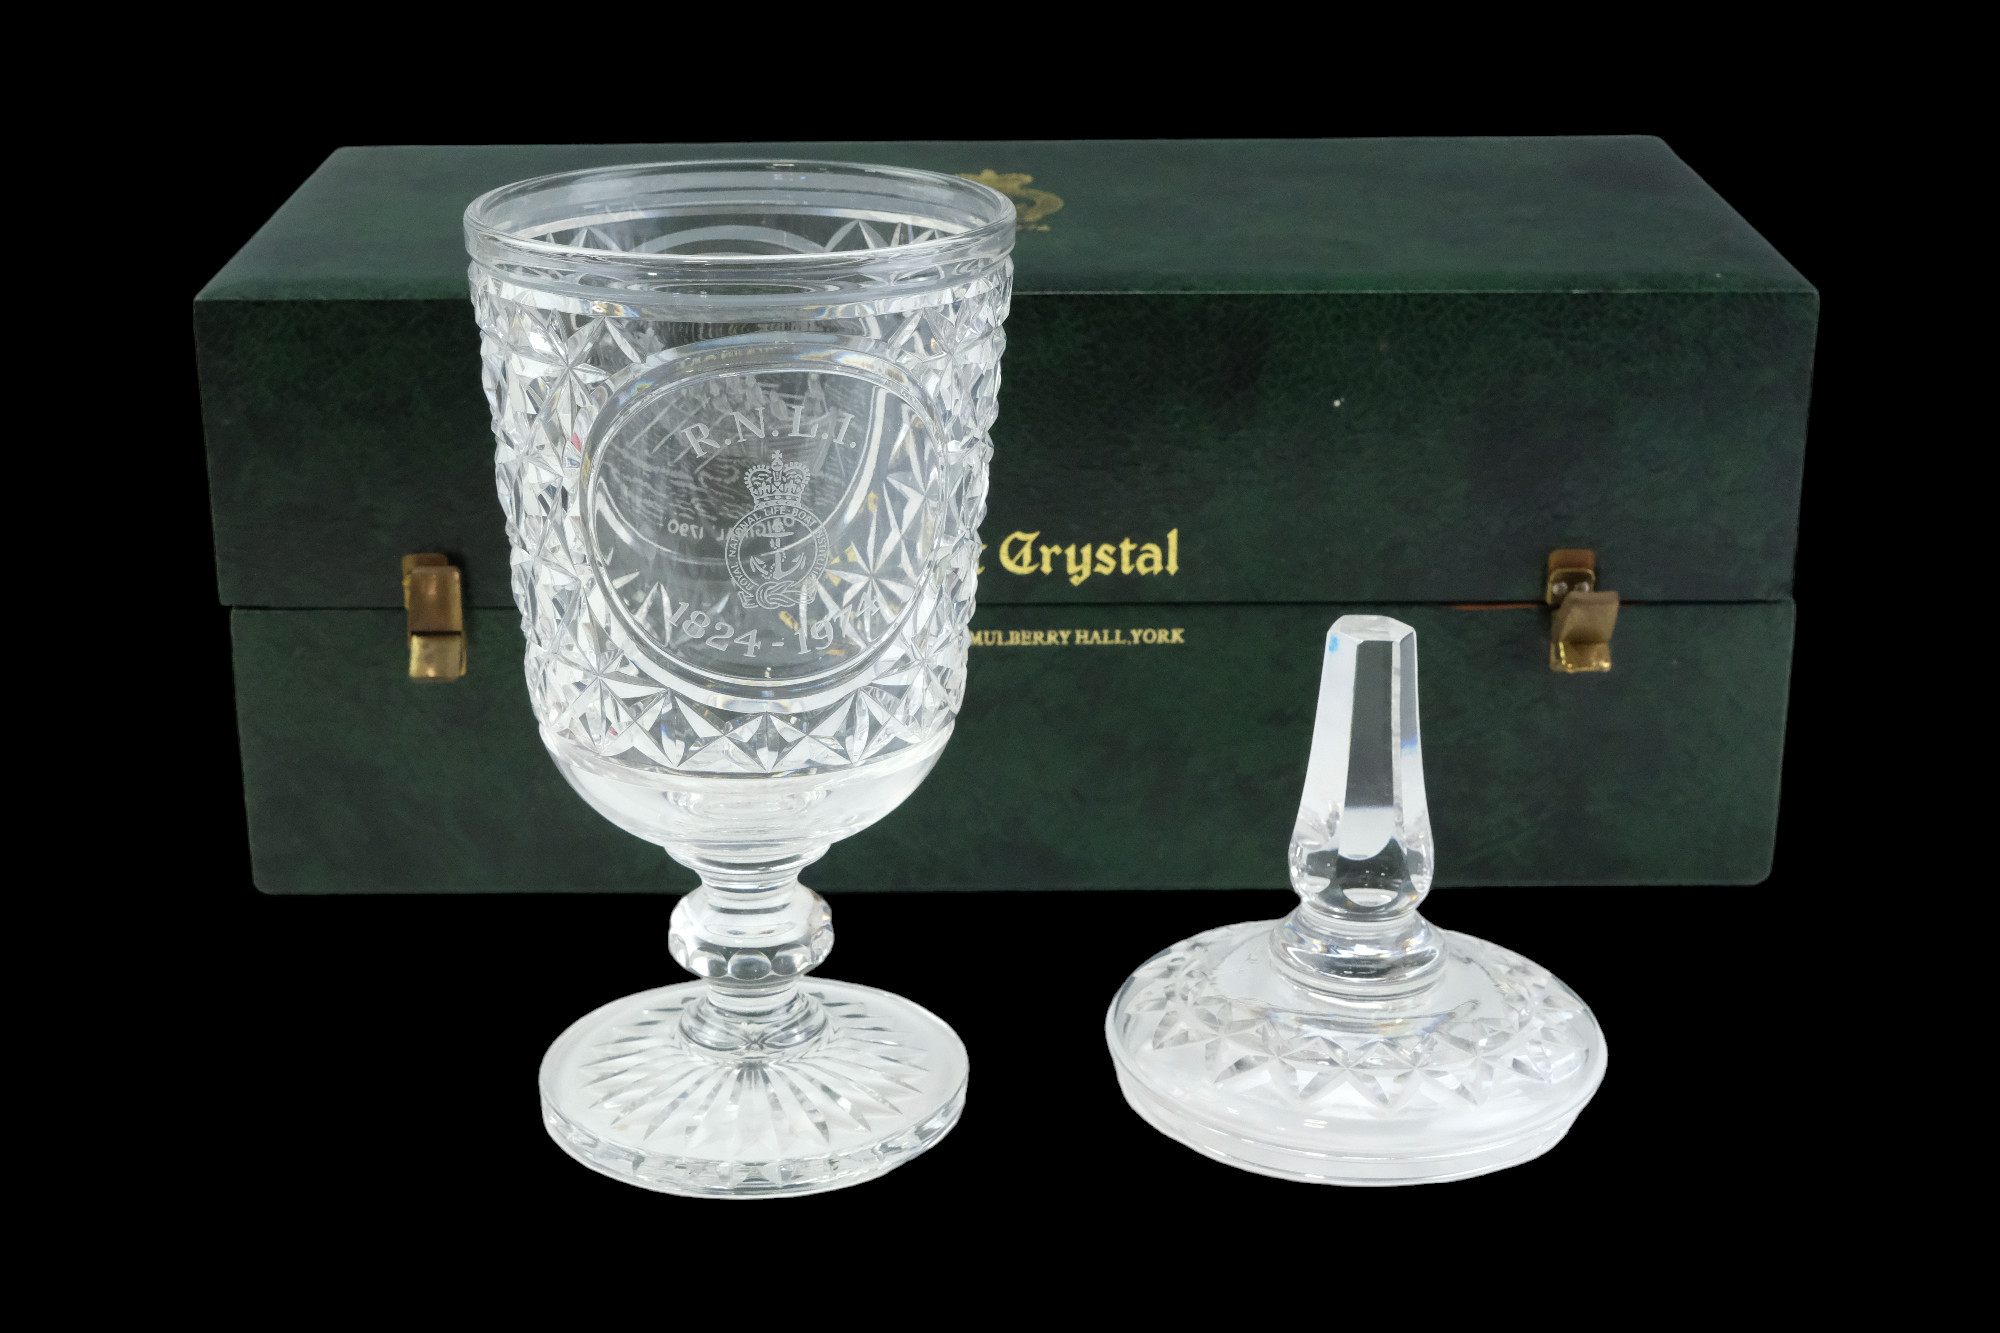 A 1974 Stuart Crystal cut glass covered vase commemorating the Royal National Lifeboat Institution